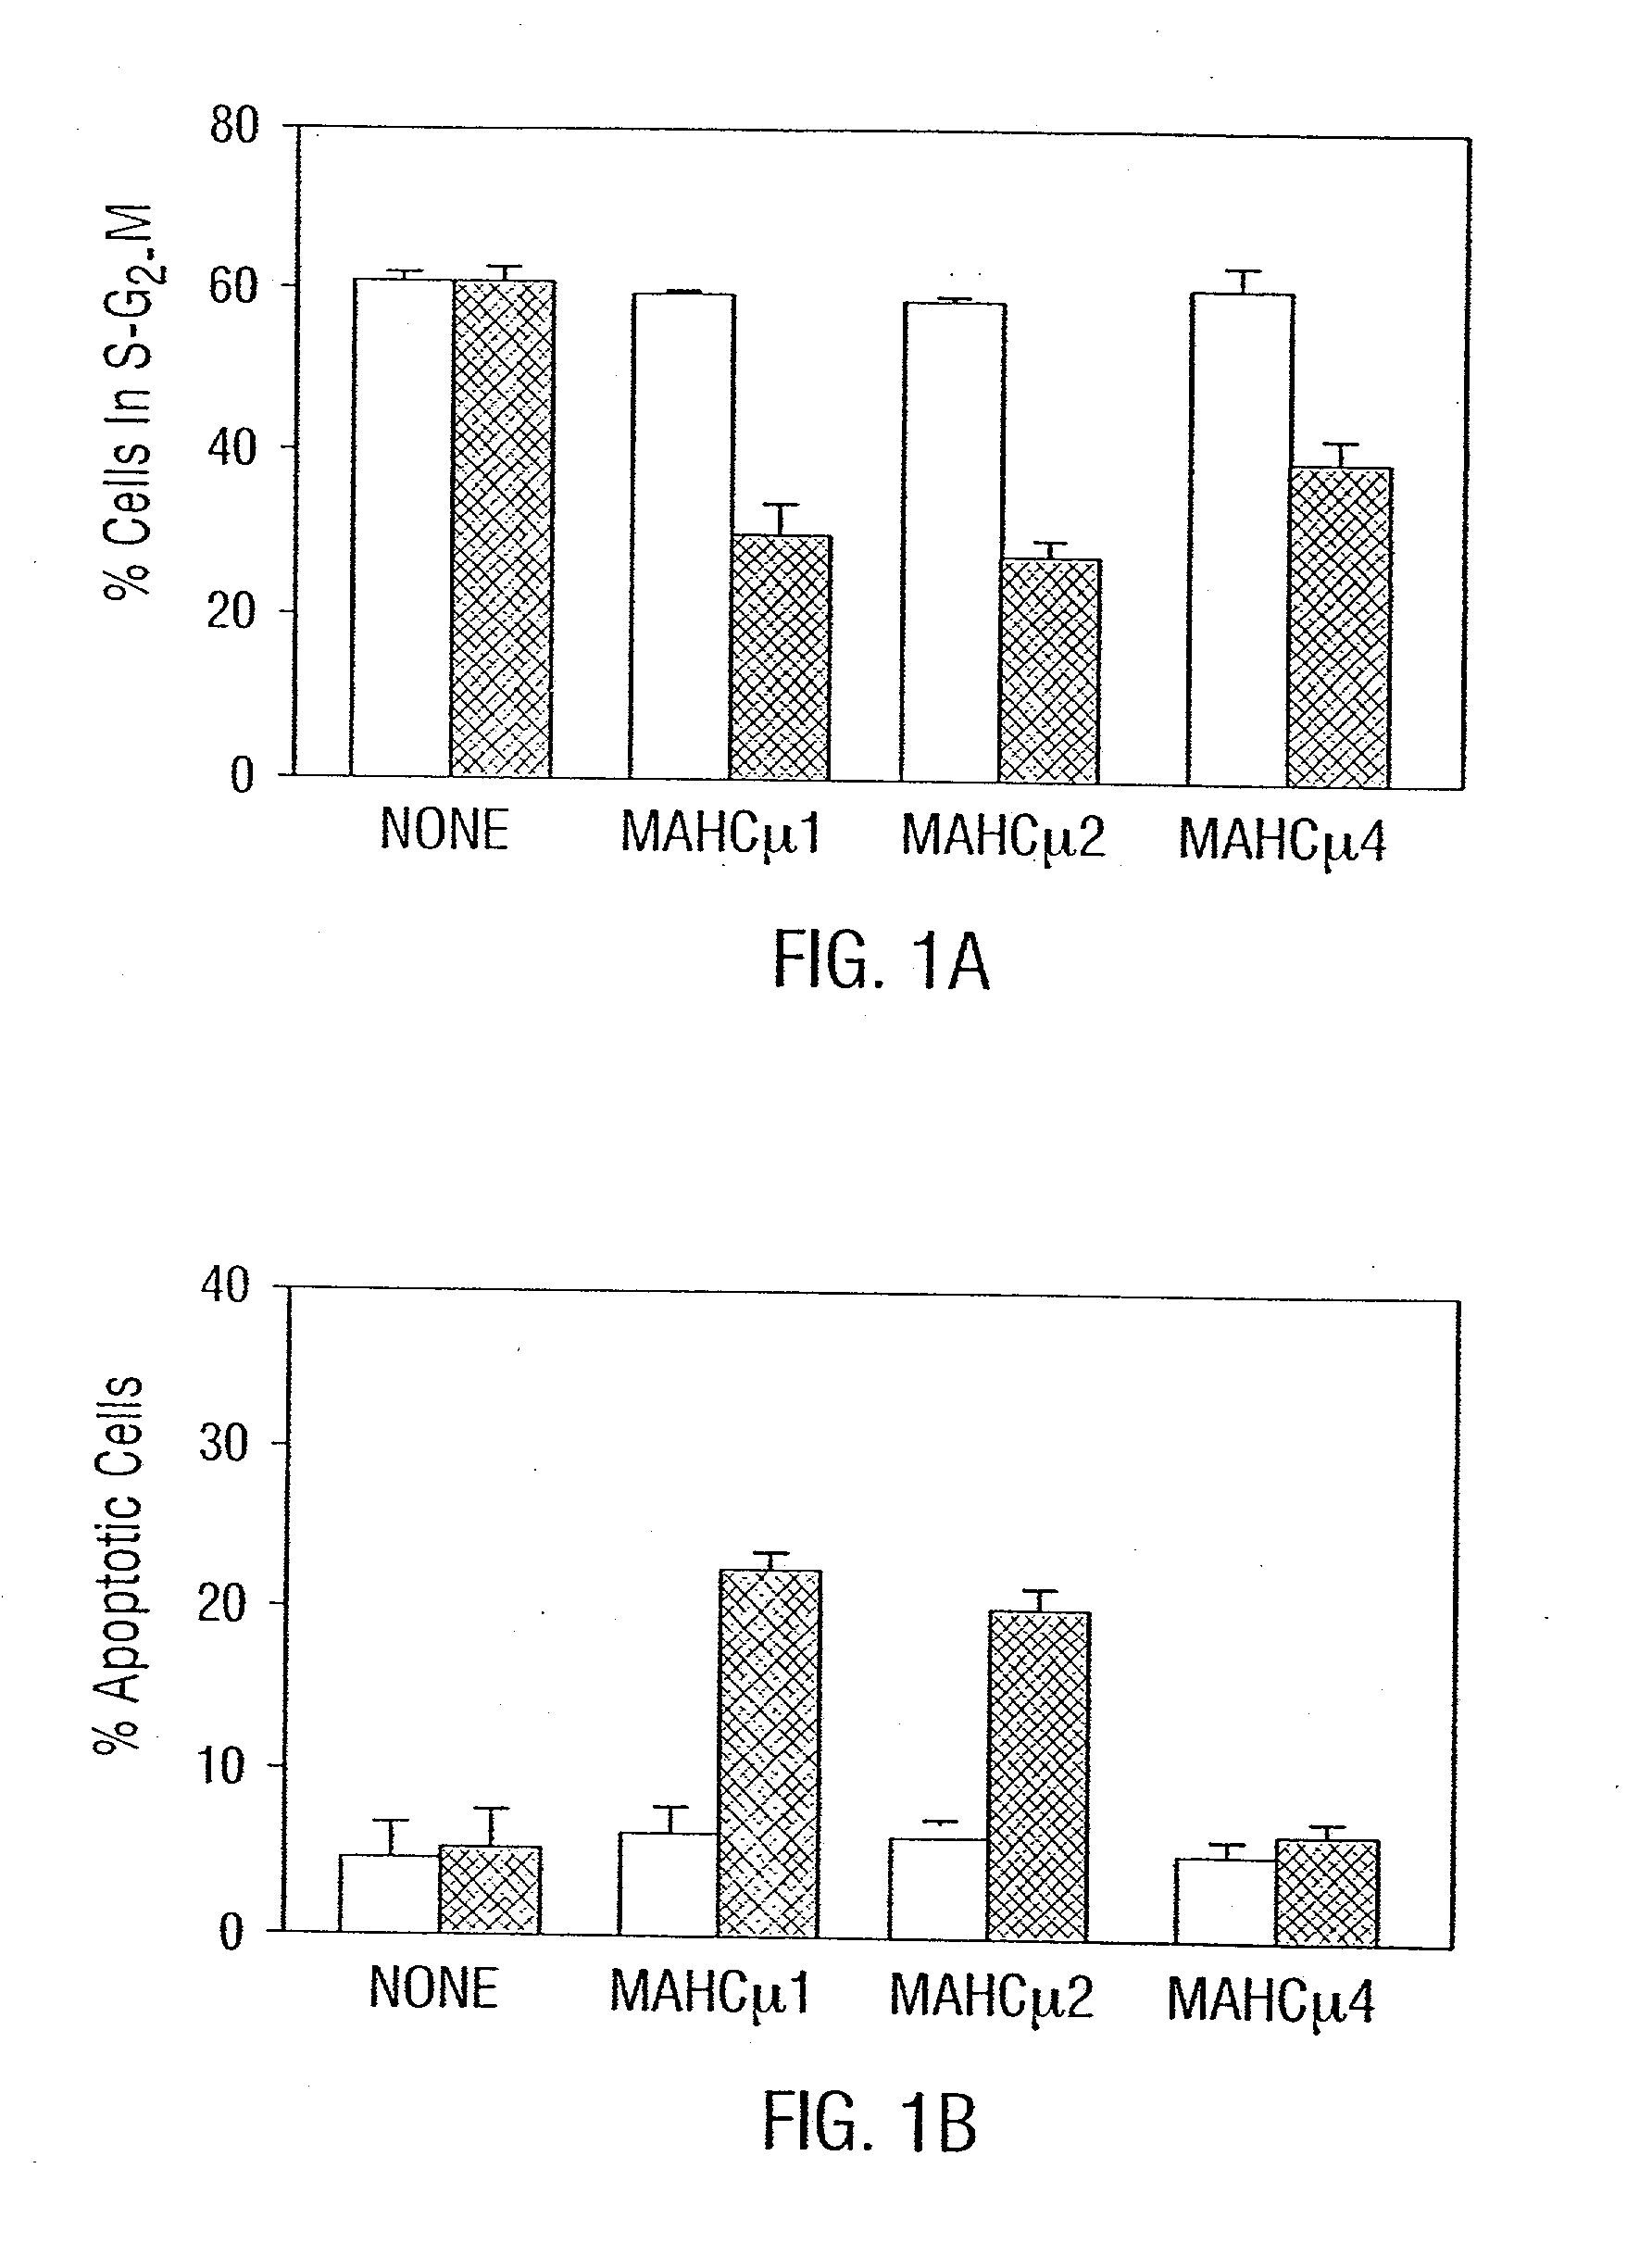 Compositions and methods for homoconjugates of antibodies which induce growth arrest or apoptosis of tumor cells